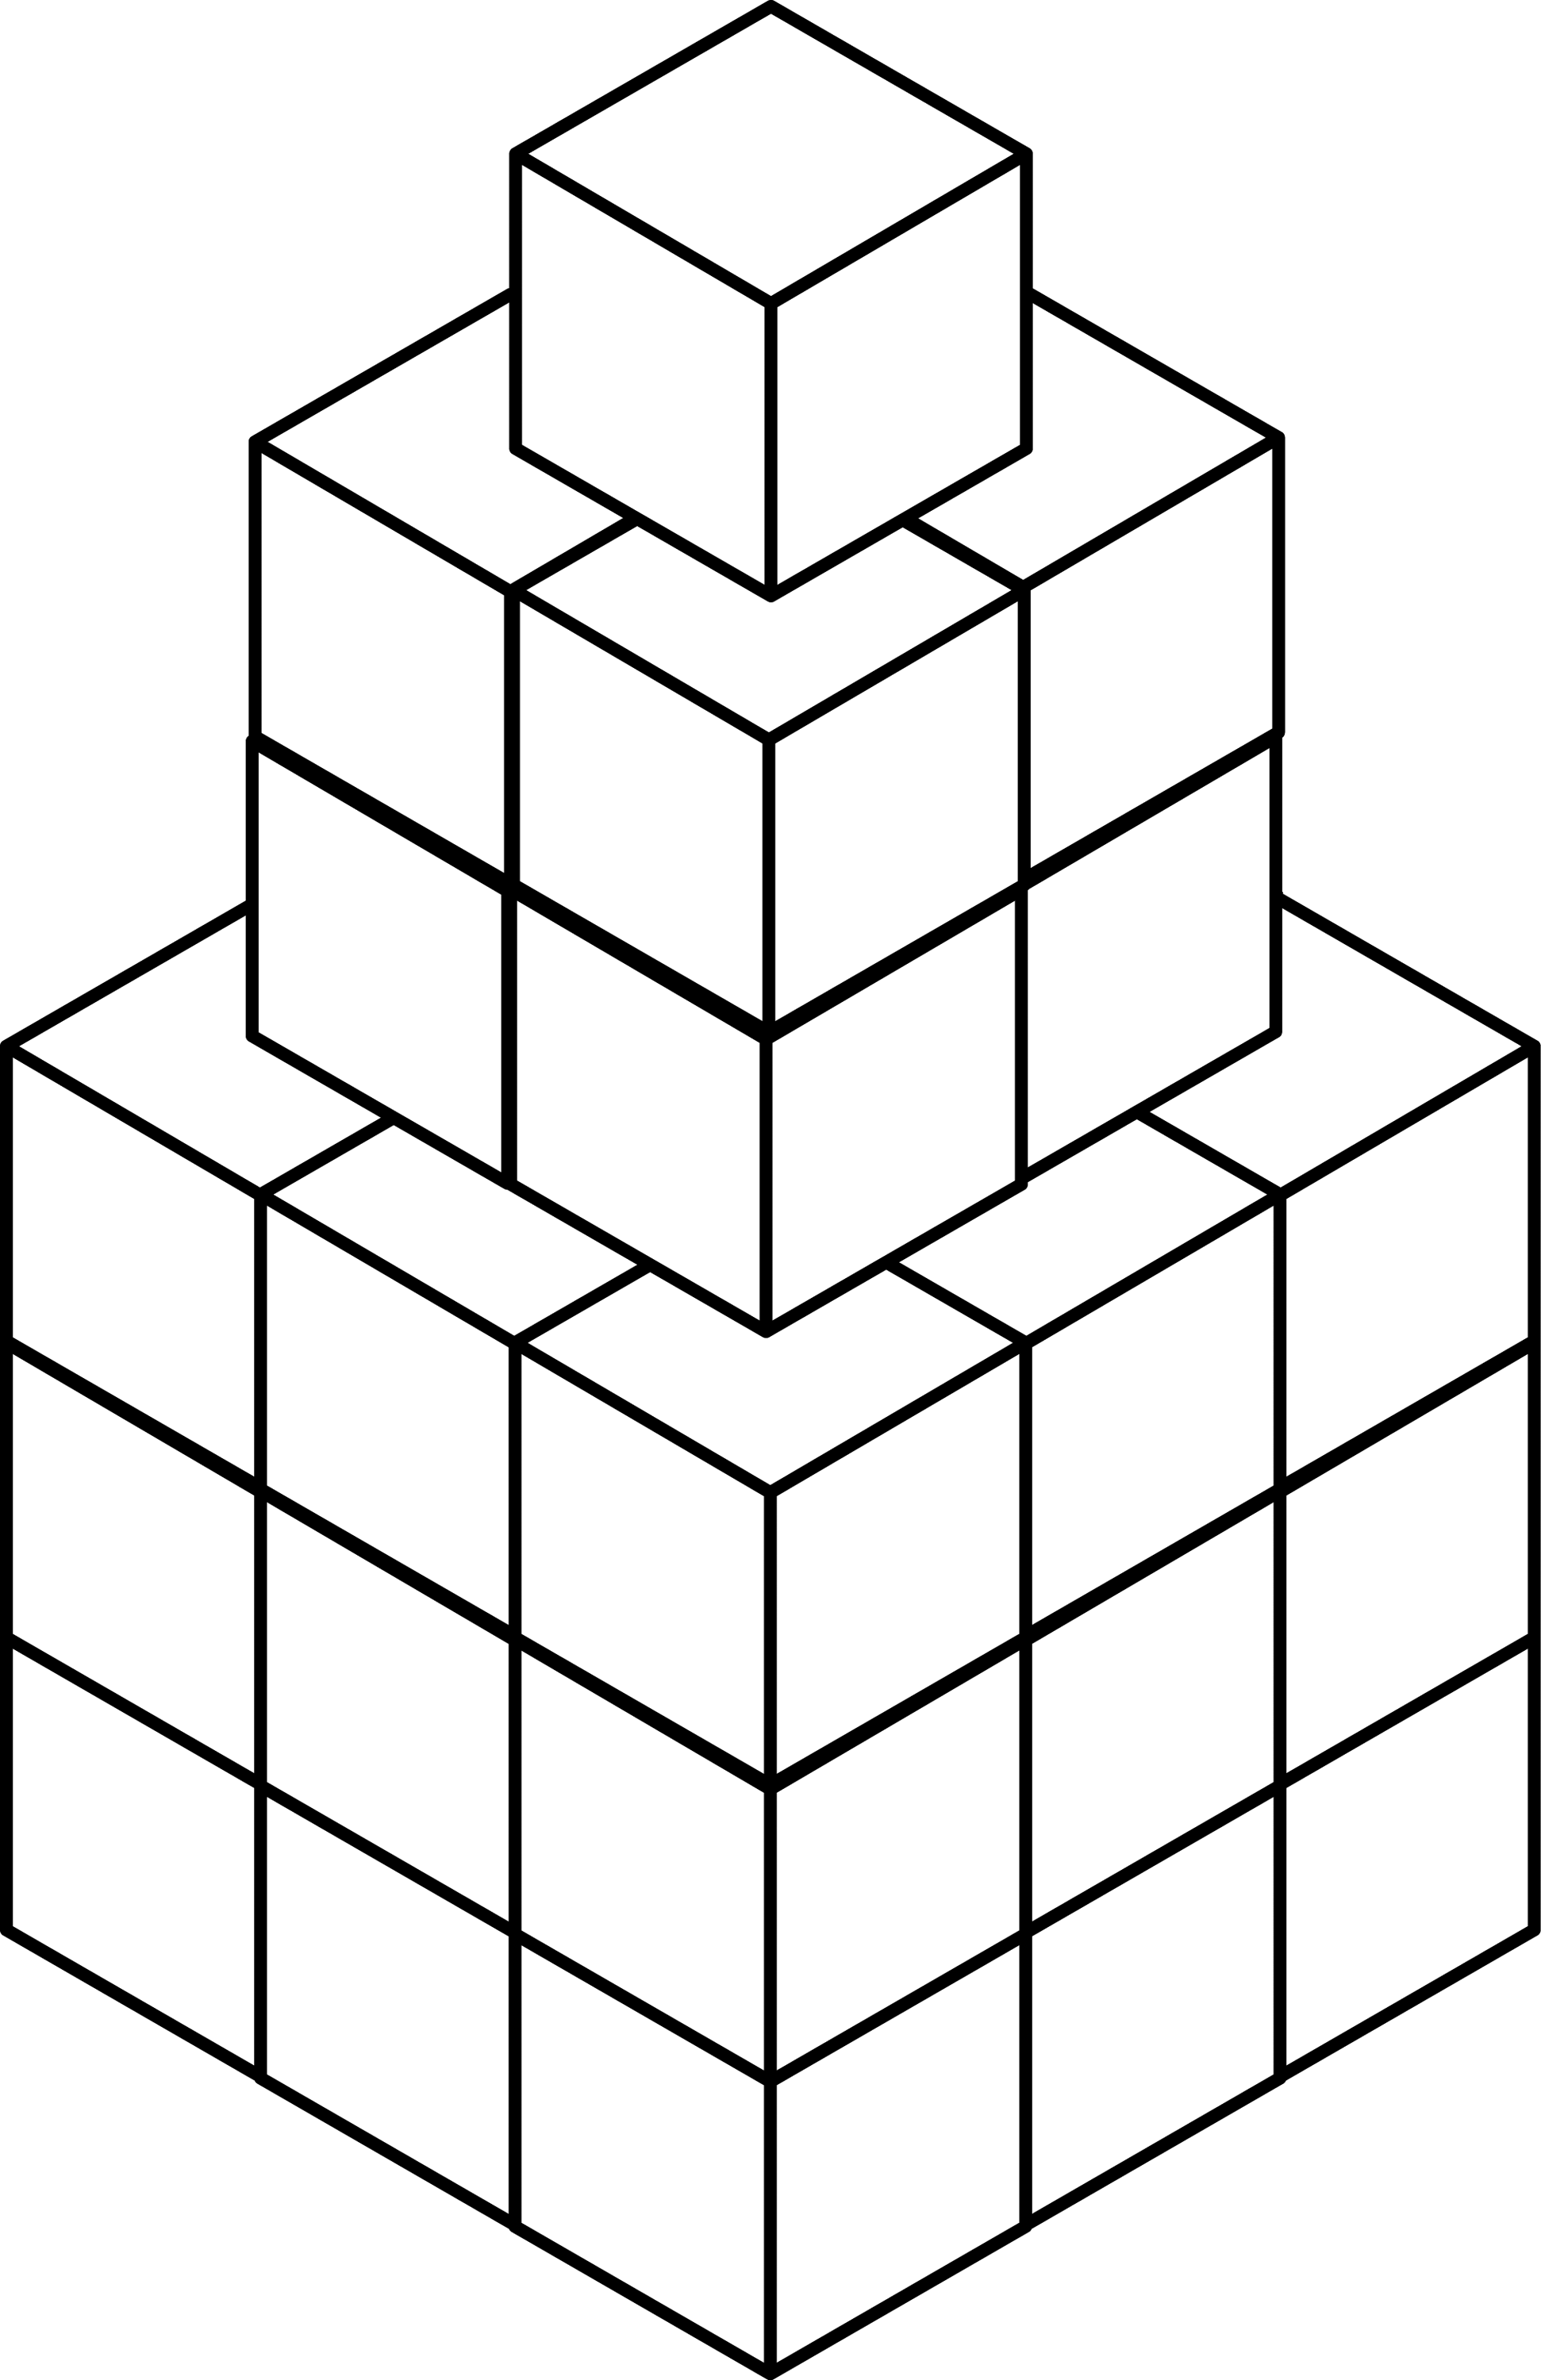 36 Stacked Congruent Cubes | ClipArt ETC